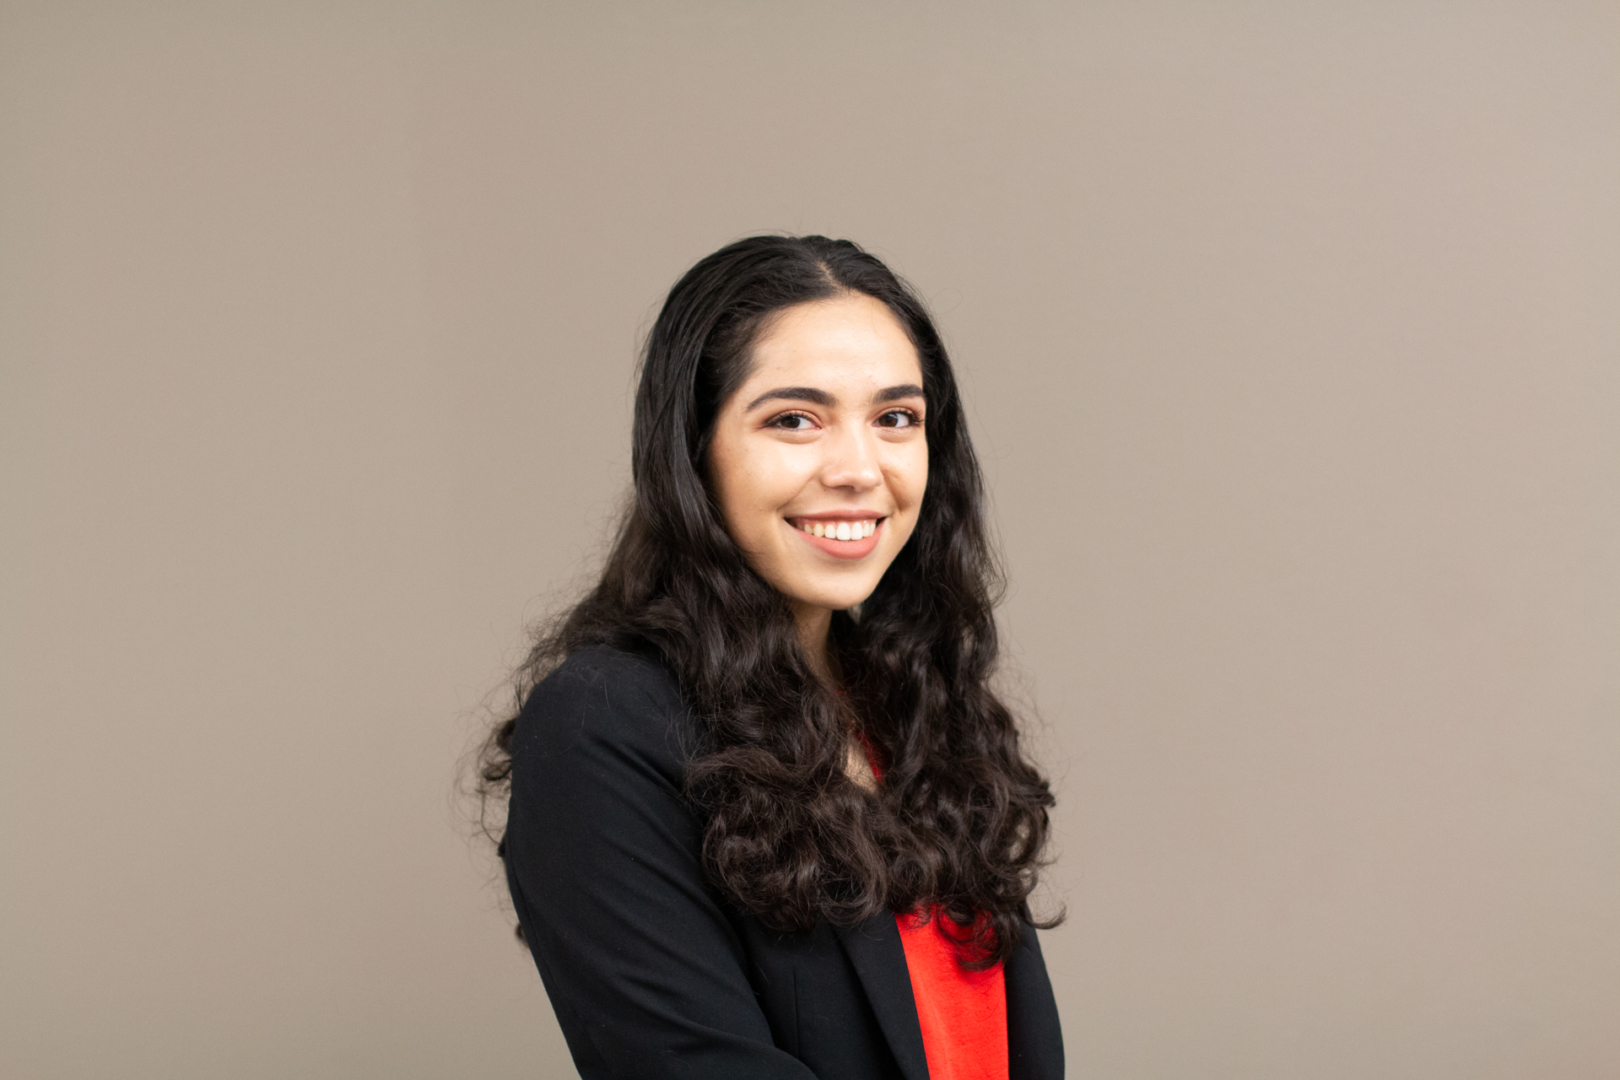 Although she never thought she would be a student leader, mathematical biology junior Jasmine Khademakbari is now the Student Government Association president for the 57th administration. | Kathryn Lenihan/The Cougar